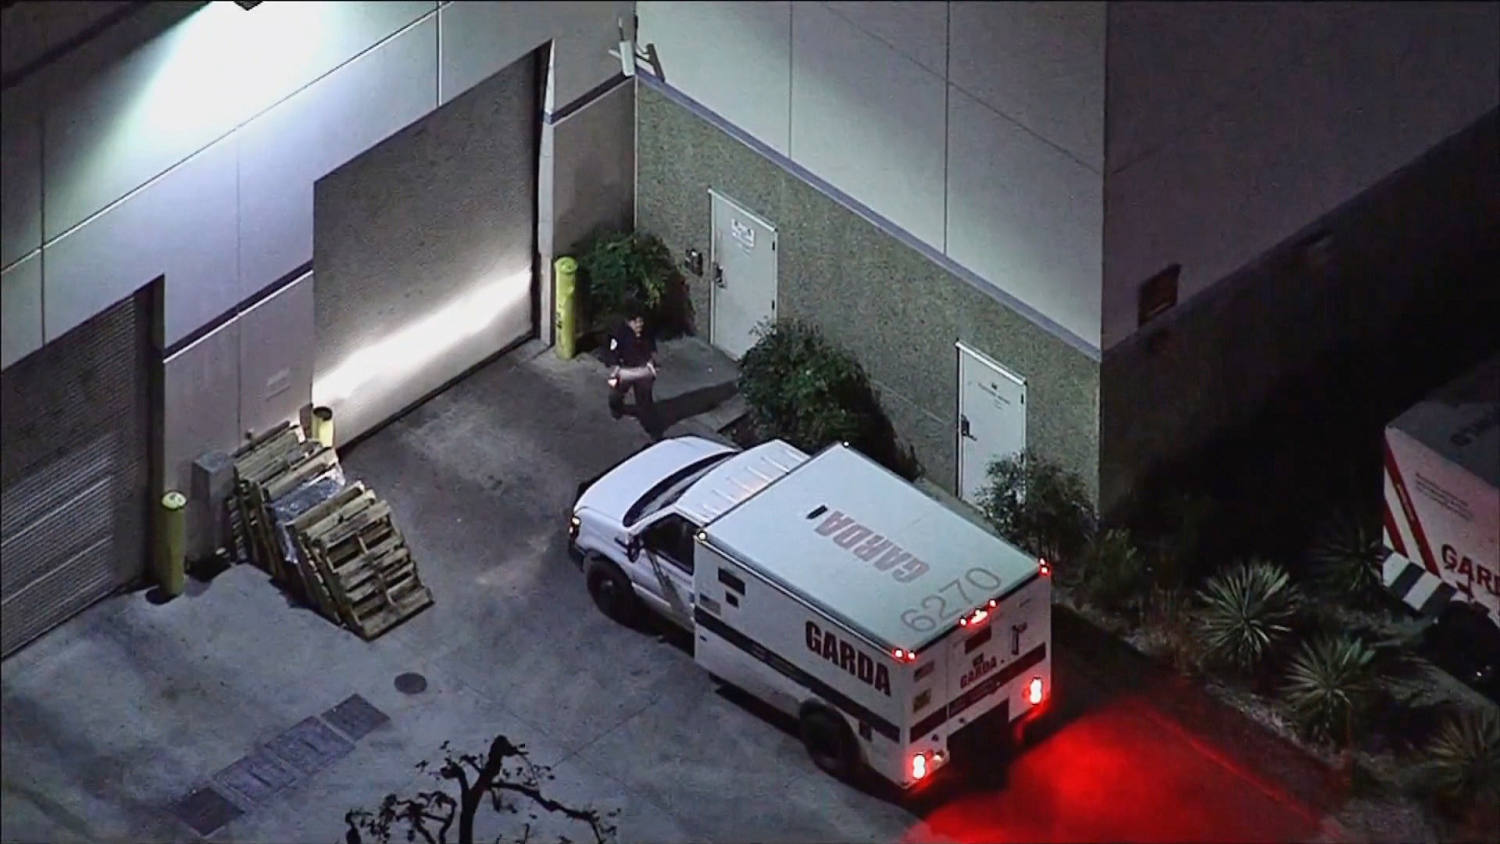 Tens of millions stolen from money storage facility in one of the largest cash heists in Southern California